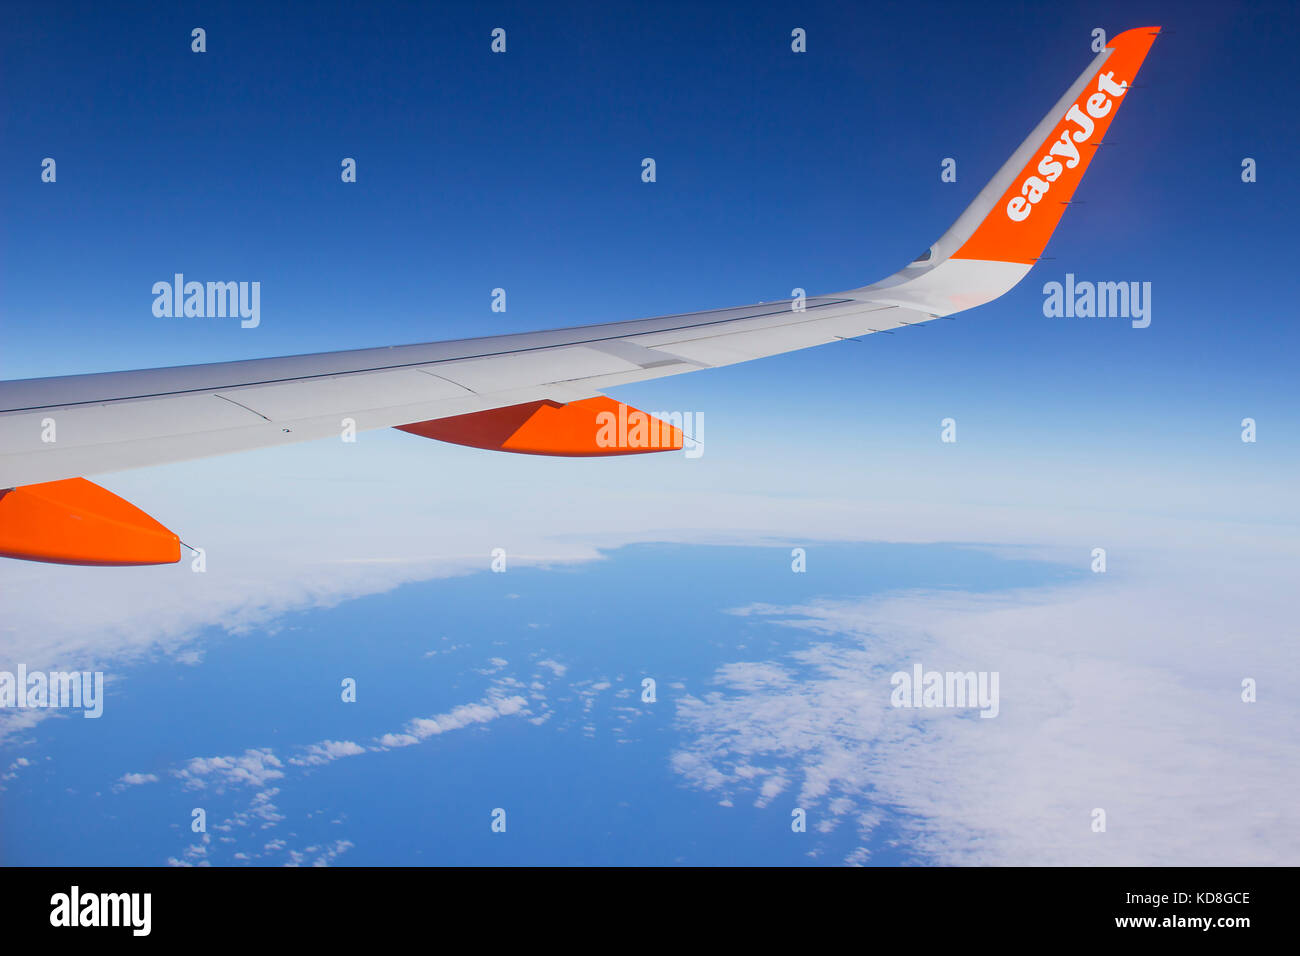 The wing and winglets of an Airbus A320 commercial airliner with a company logo while in flight Stock Photo